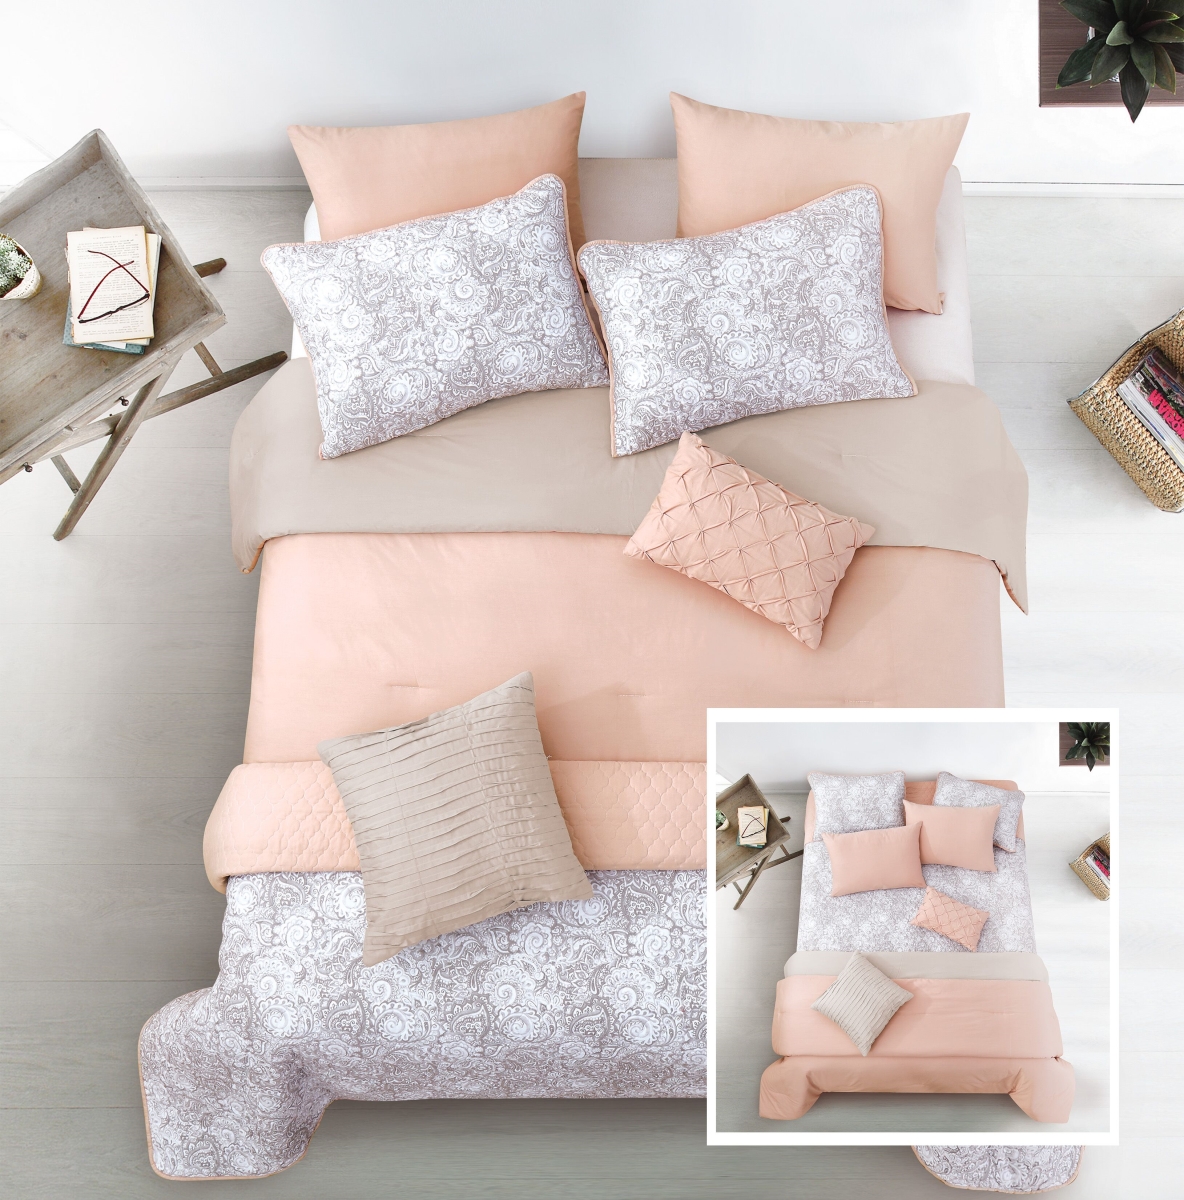 80342 Katie Blush Layered Comforter & Coverlet Set, Blush & Taupe - Twin Size - 6 Piece